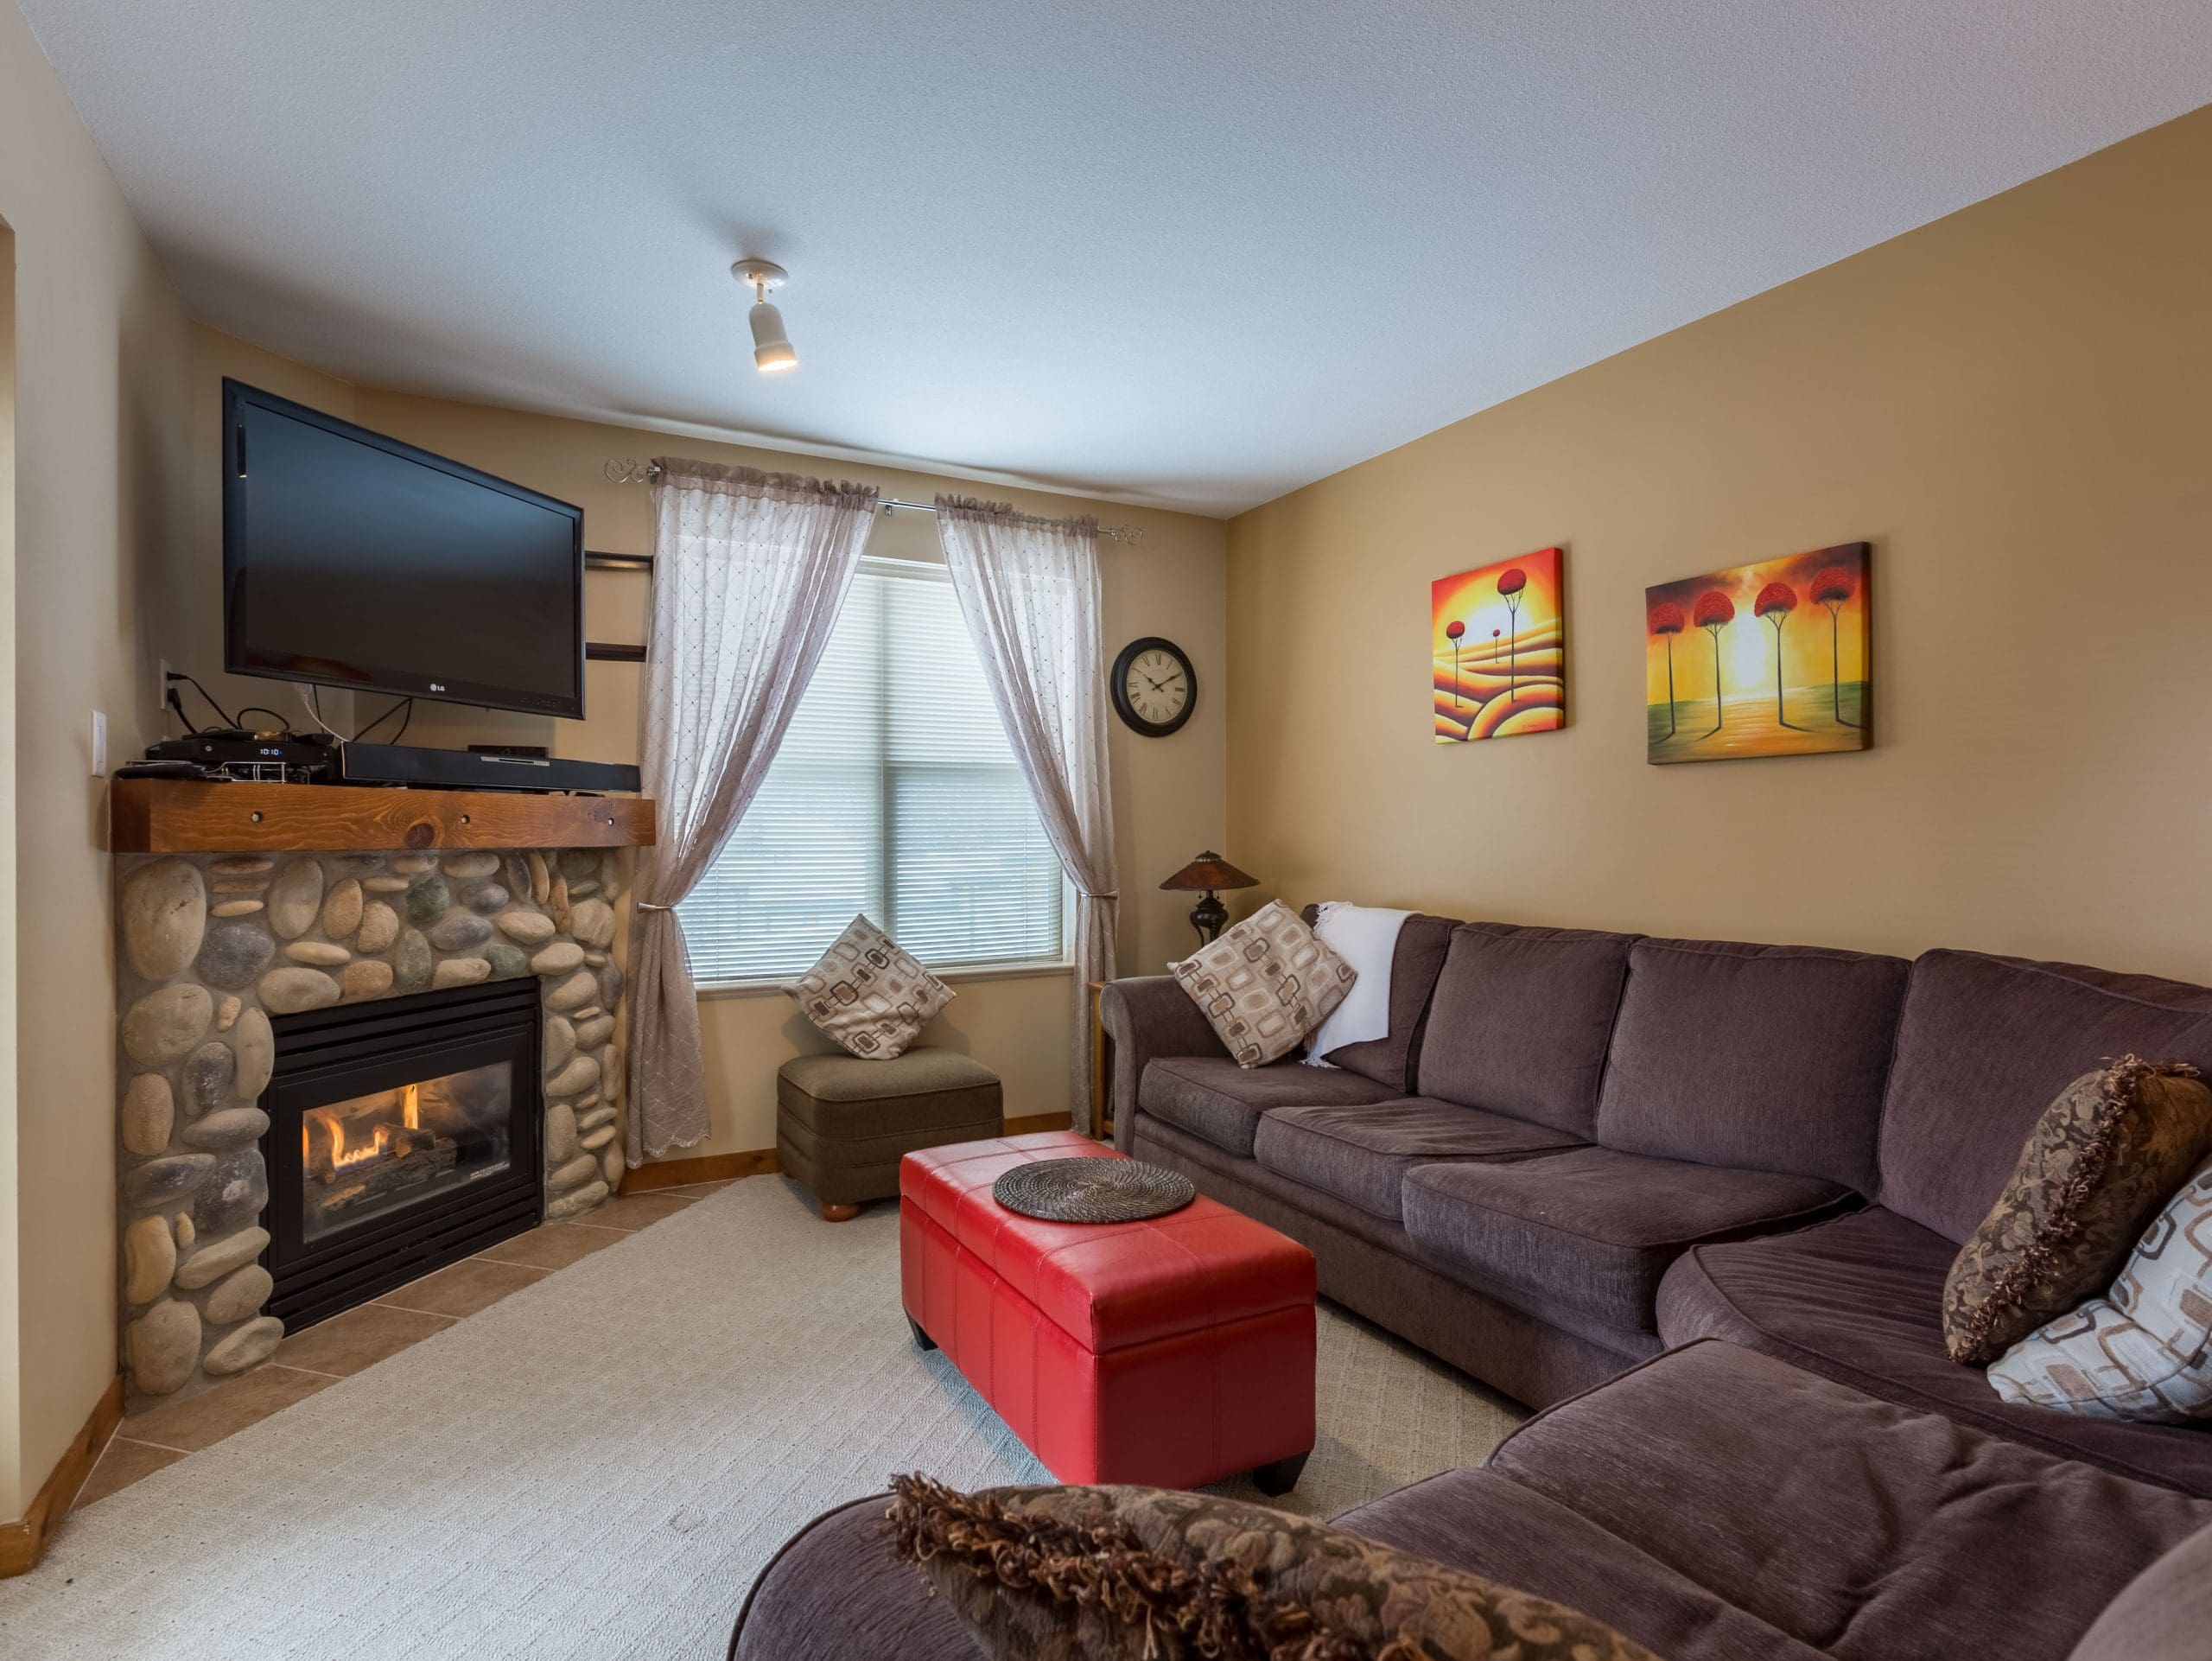 Living room of corner 2 bedroom condo. Gas fireplace, TV, large balcony with private BBQ. Pet-friendly too!